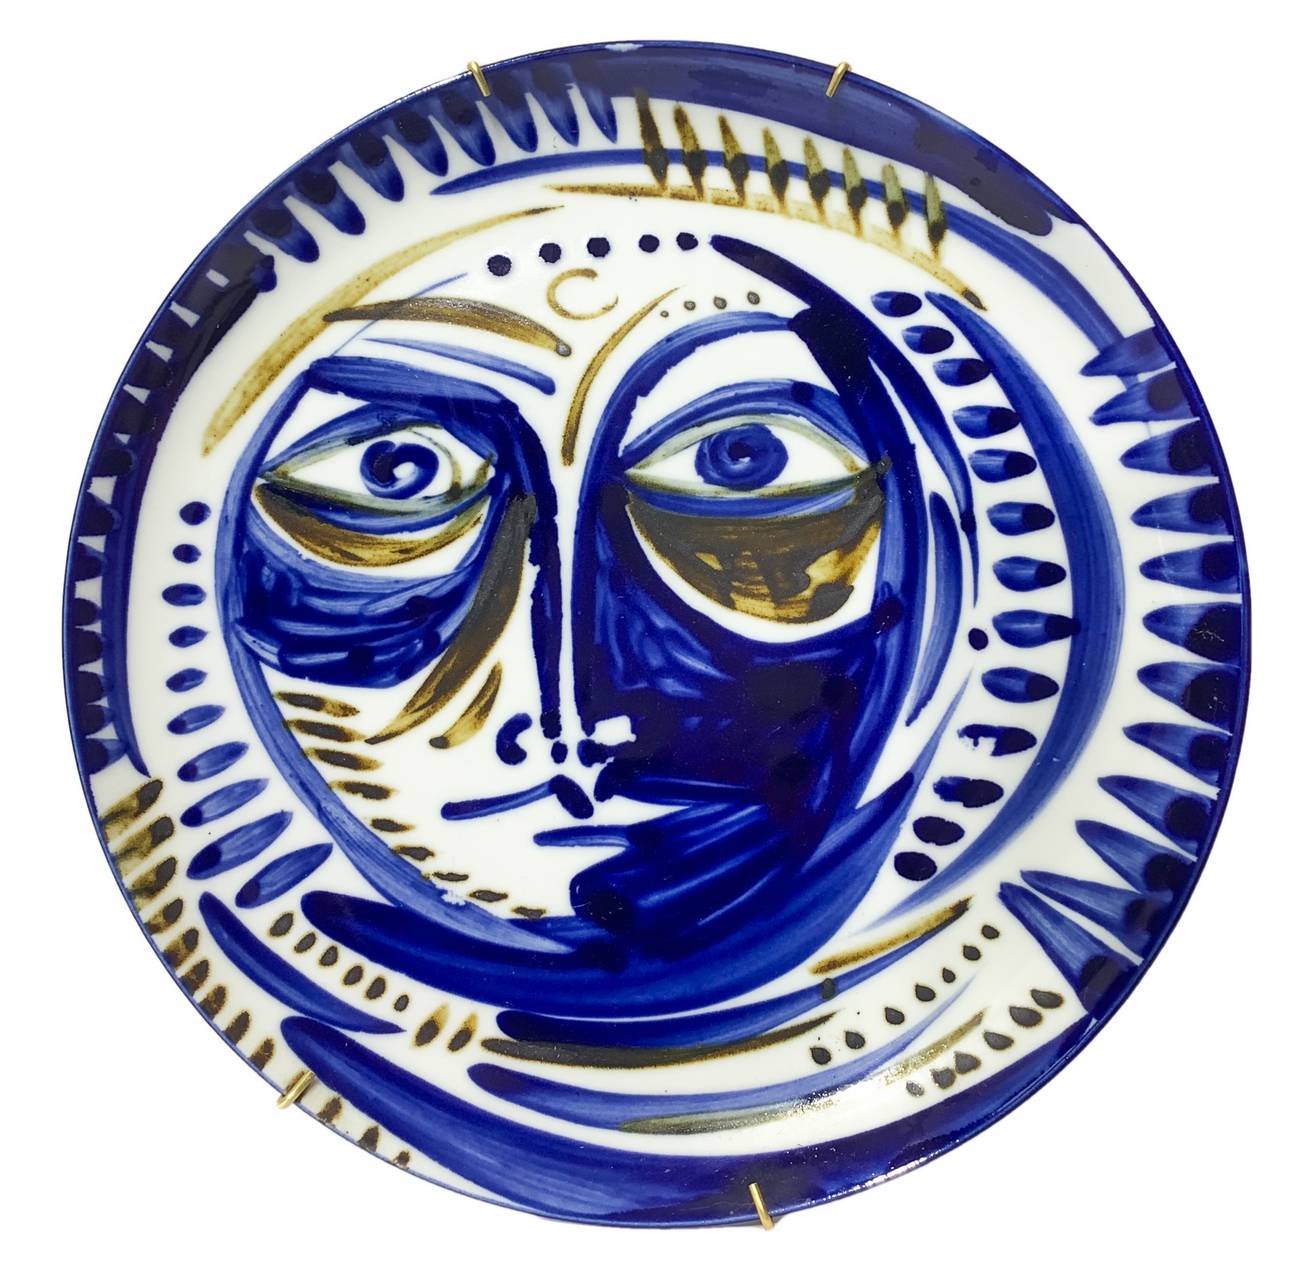 Wall Plate porcelain depicting his face in shades of blue, in the style of Vallaurice ceramics. Diam